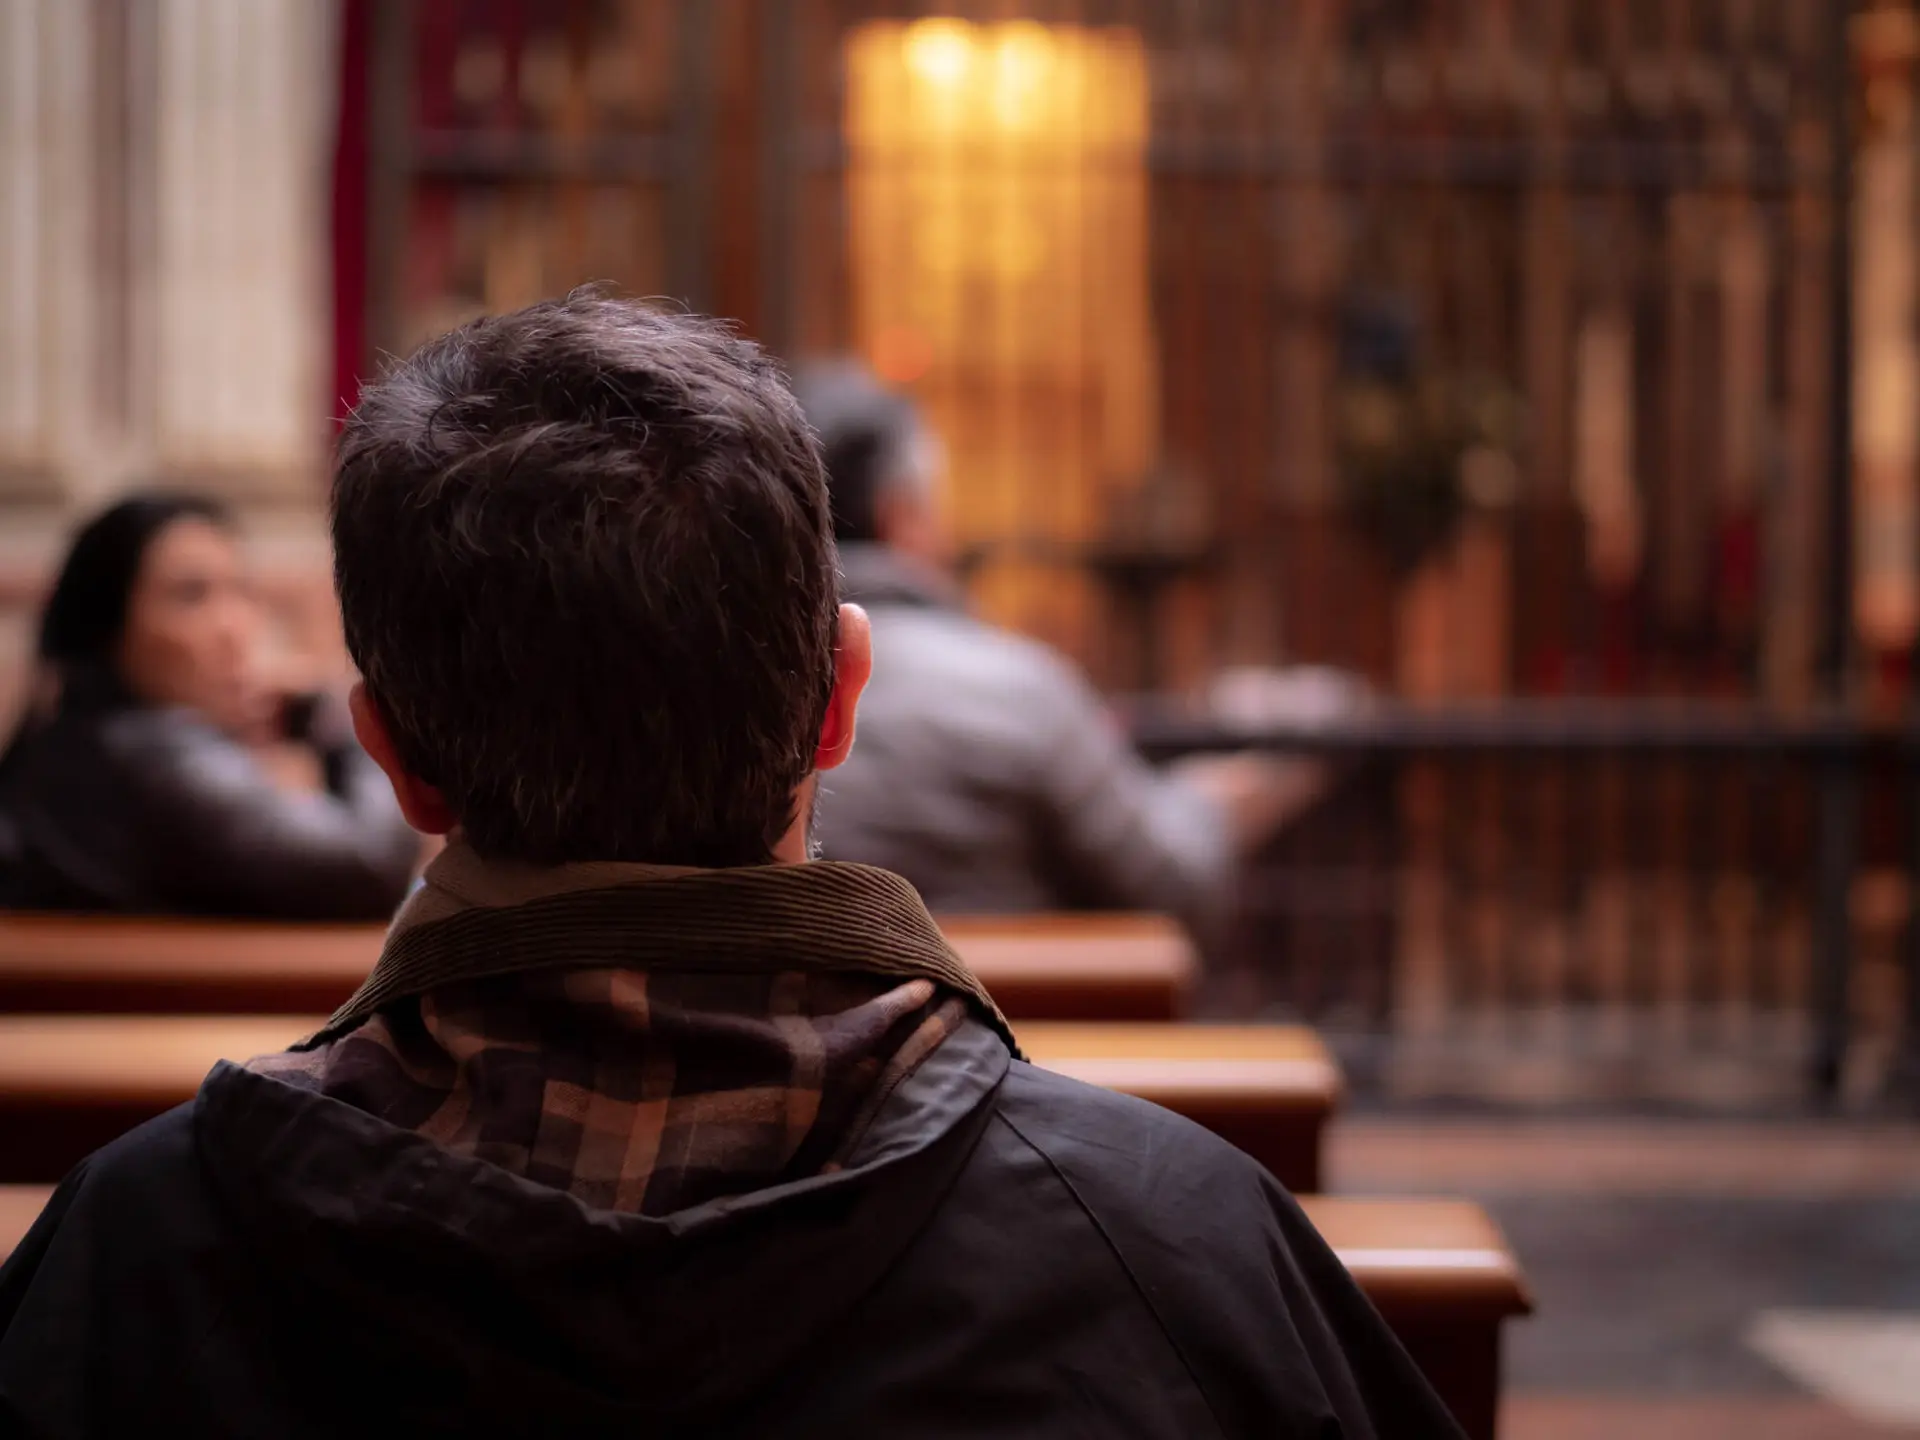 a person sits on a pew in a religious house of worship with a brown plaid and corduroy shirt facing the altar